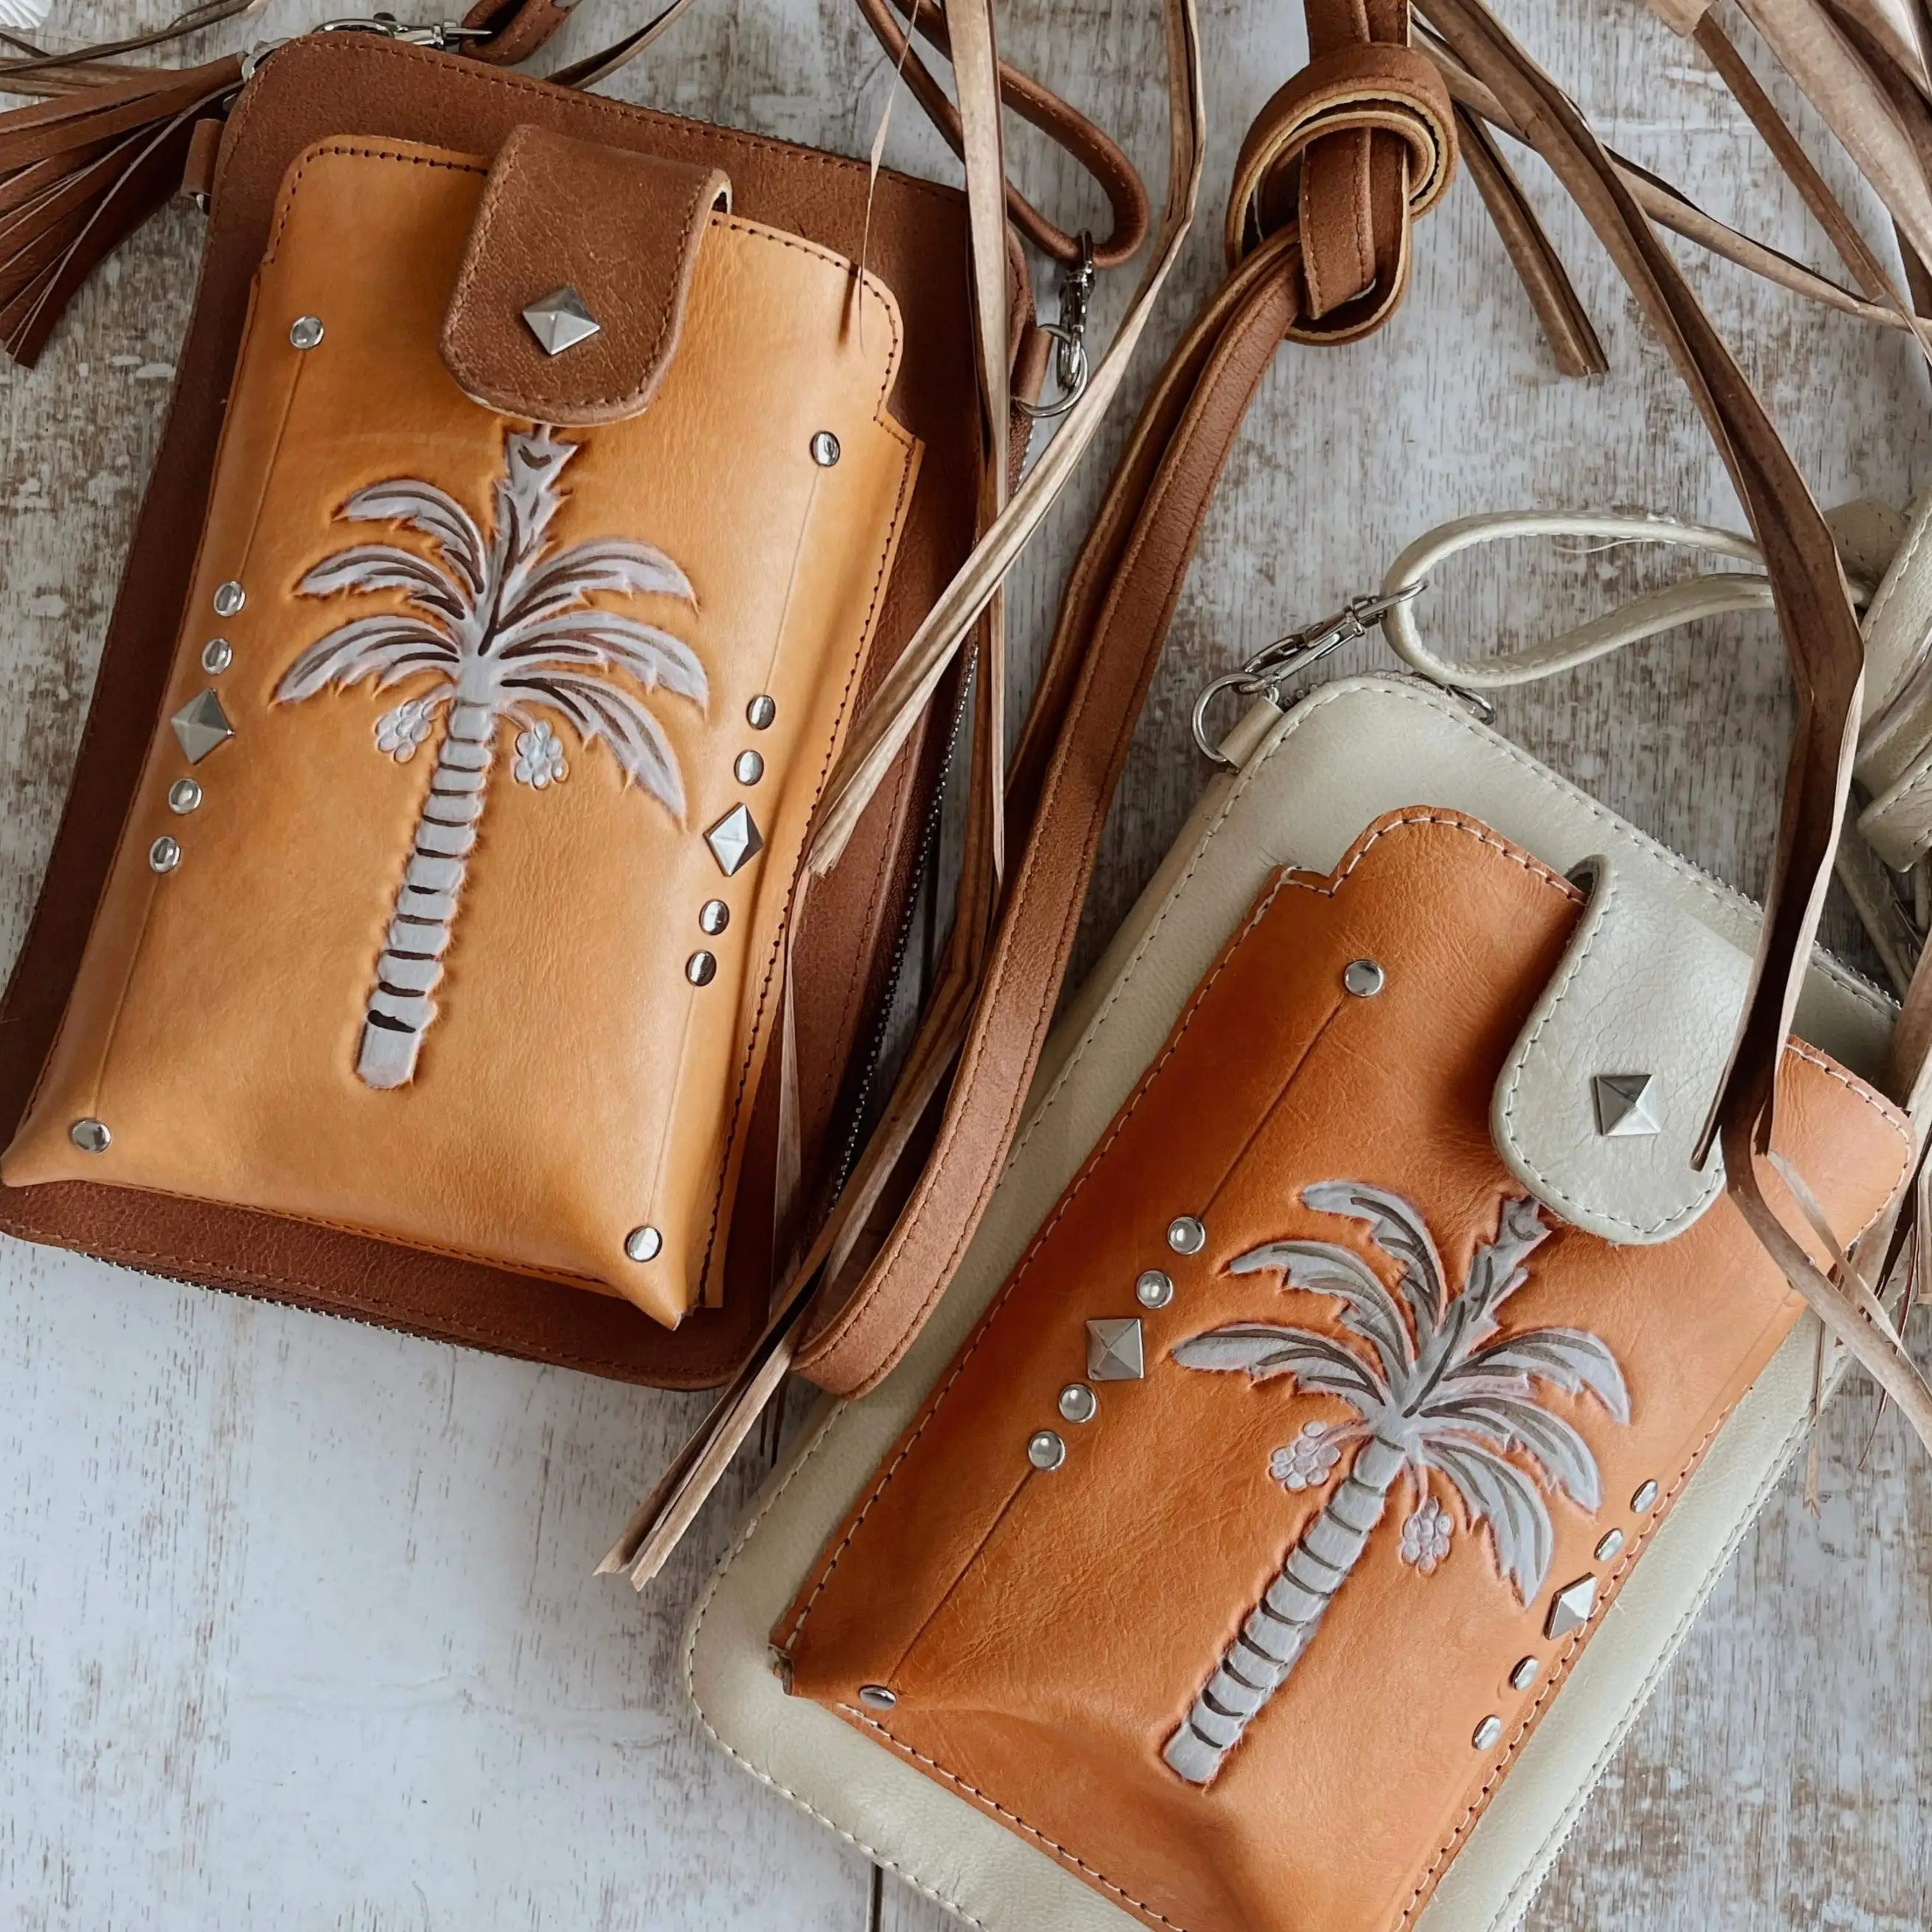 The Palm Cove Phone Wallet